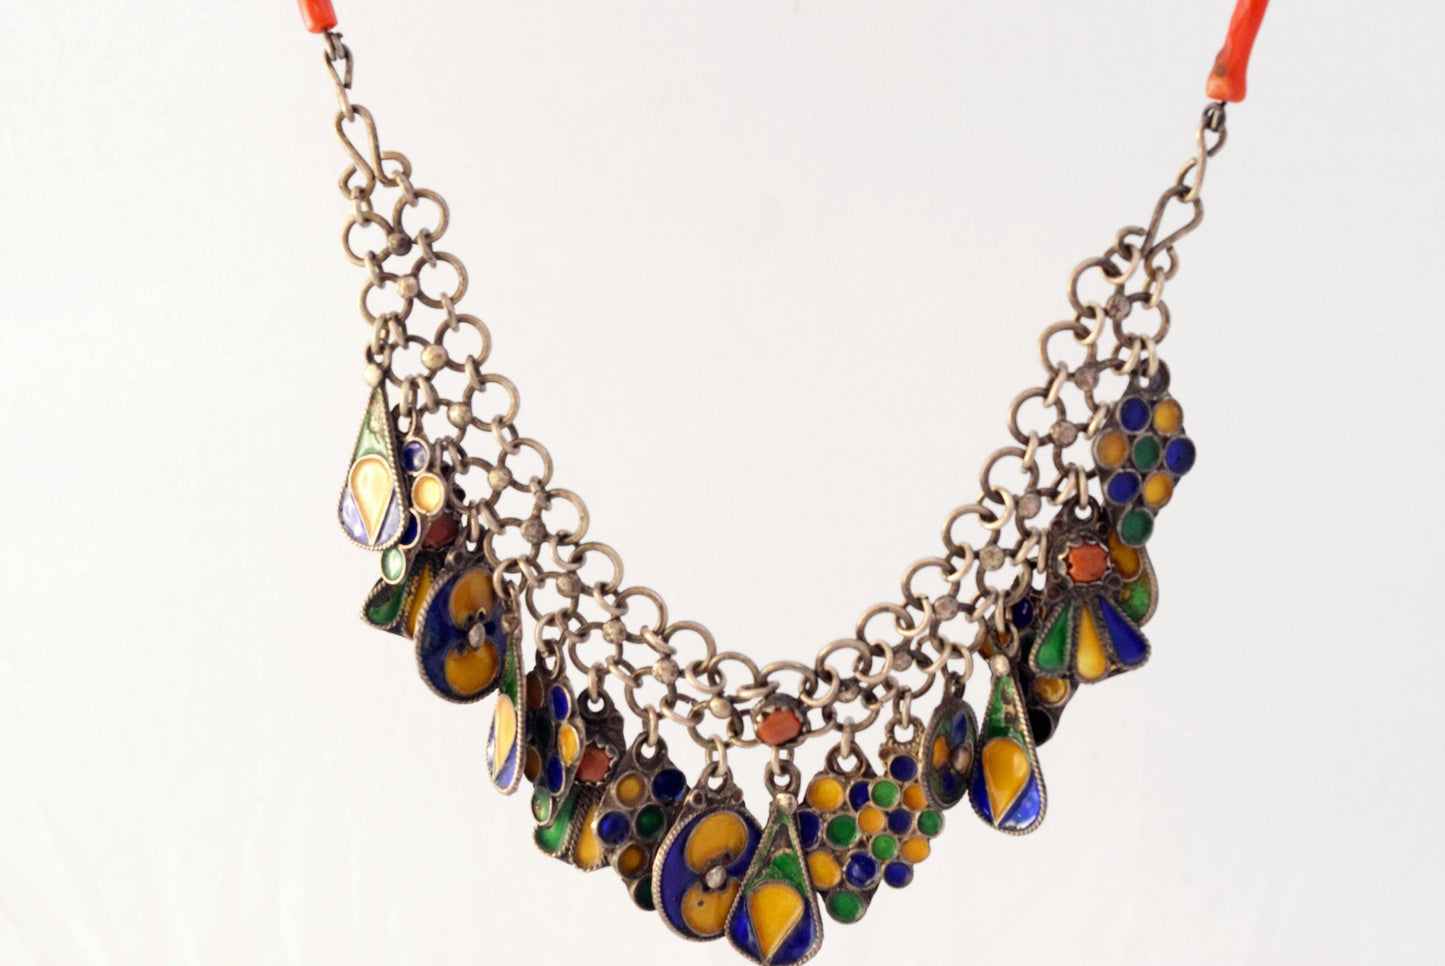 Kabyle necklace